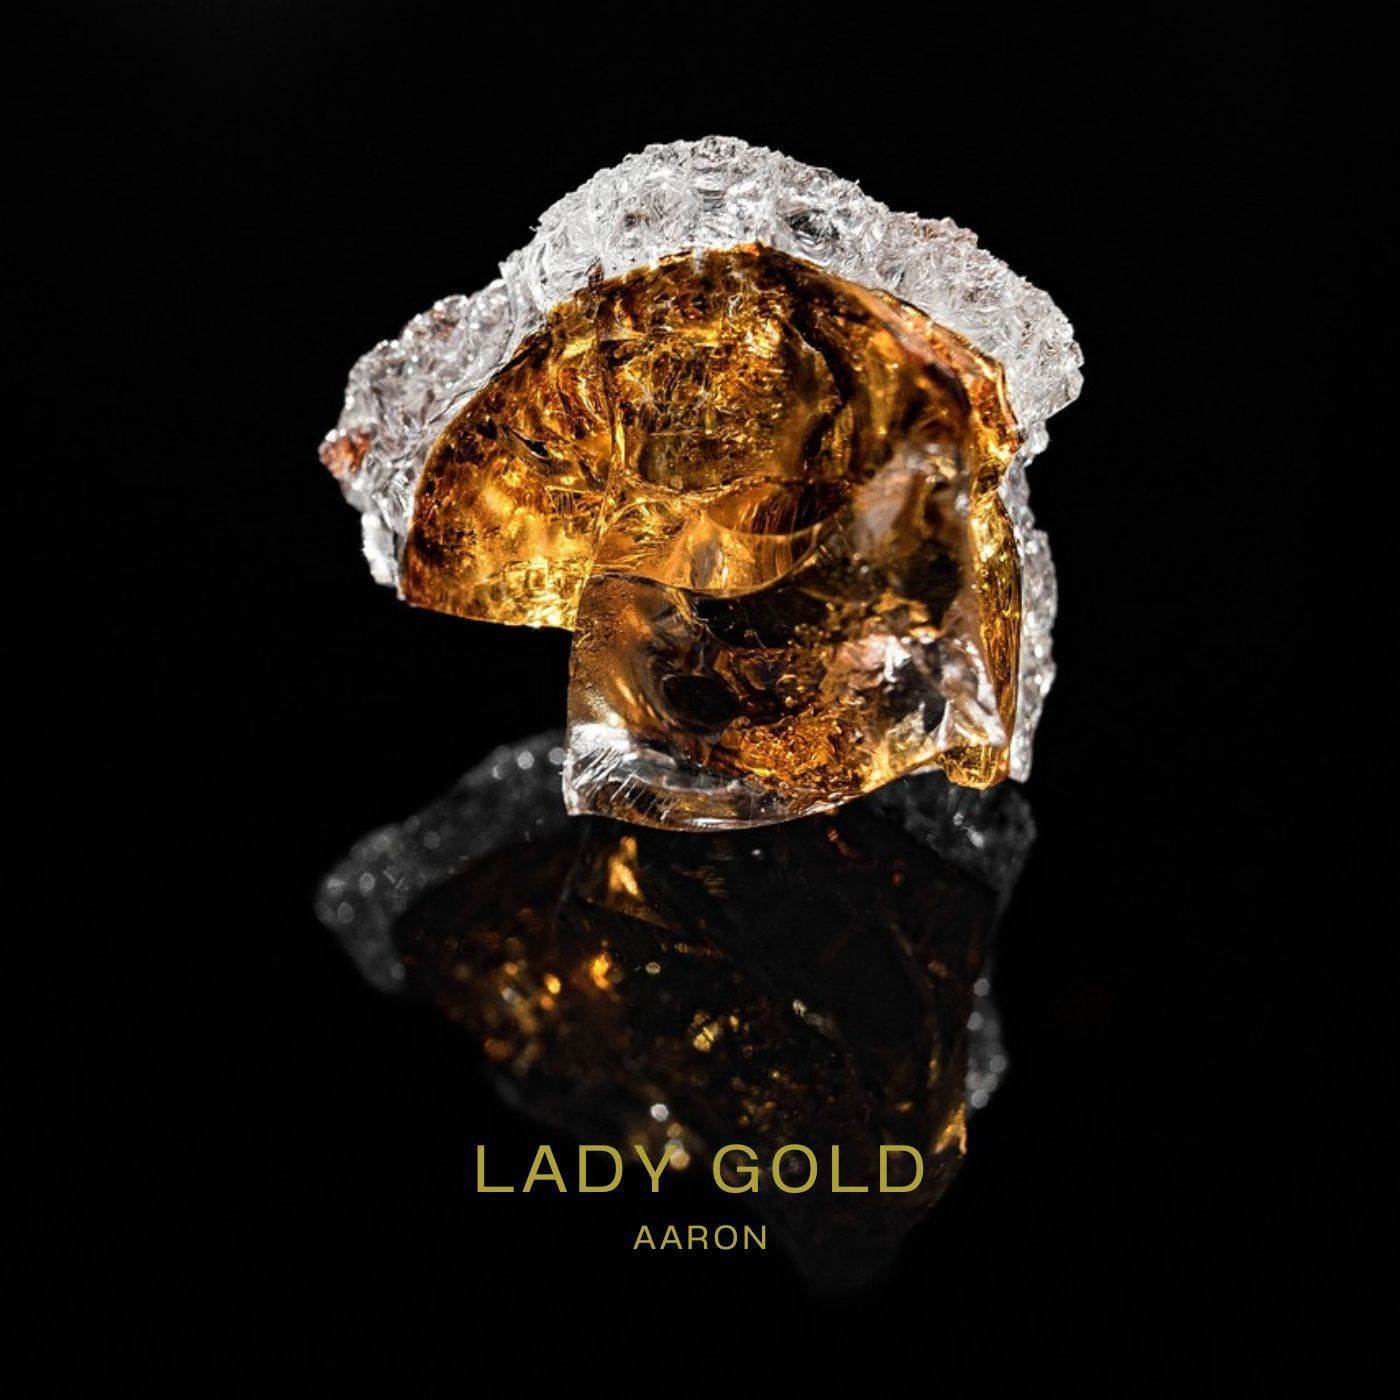 AaRON - Lady Gold